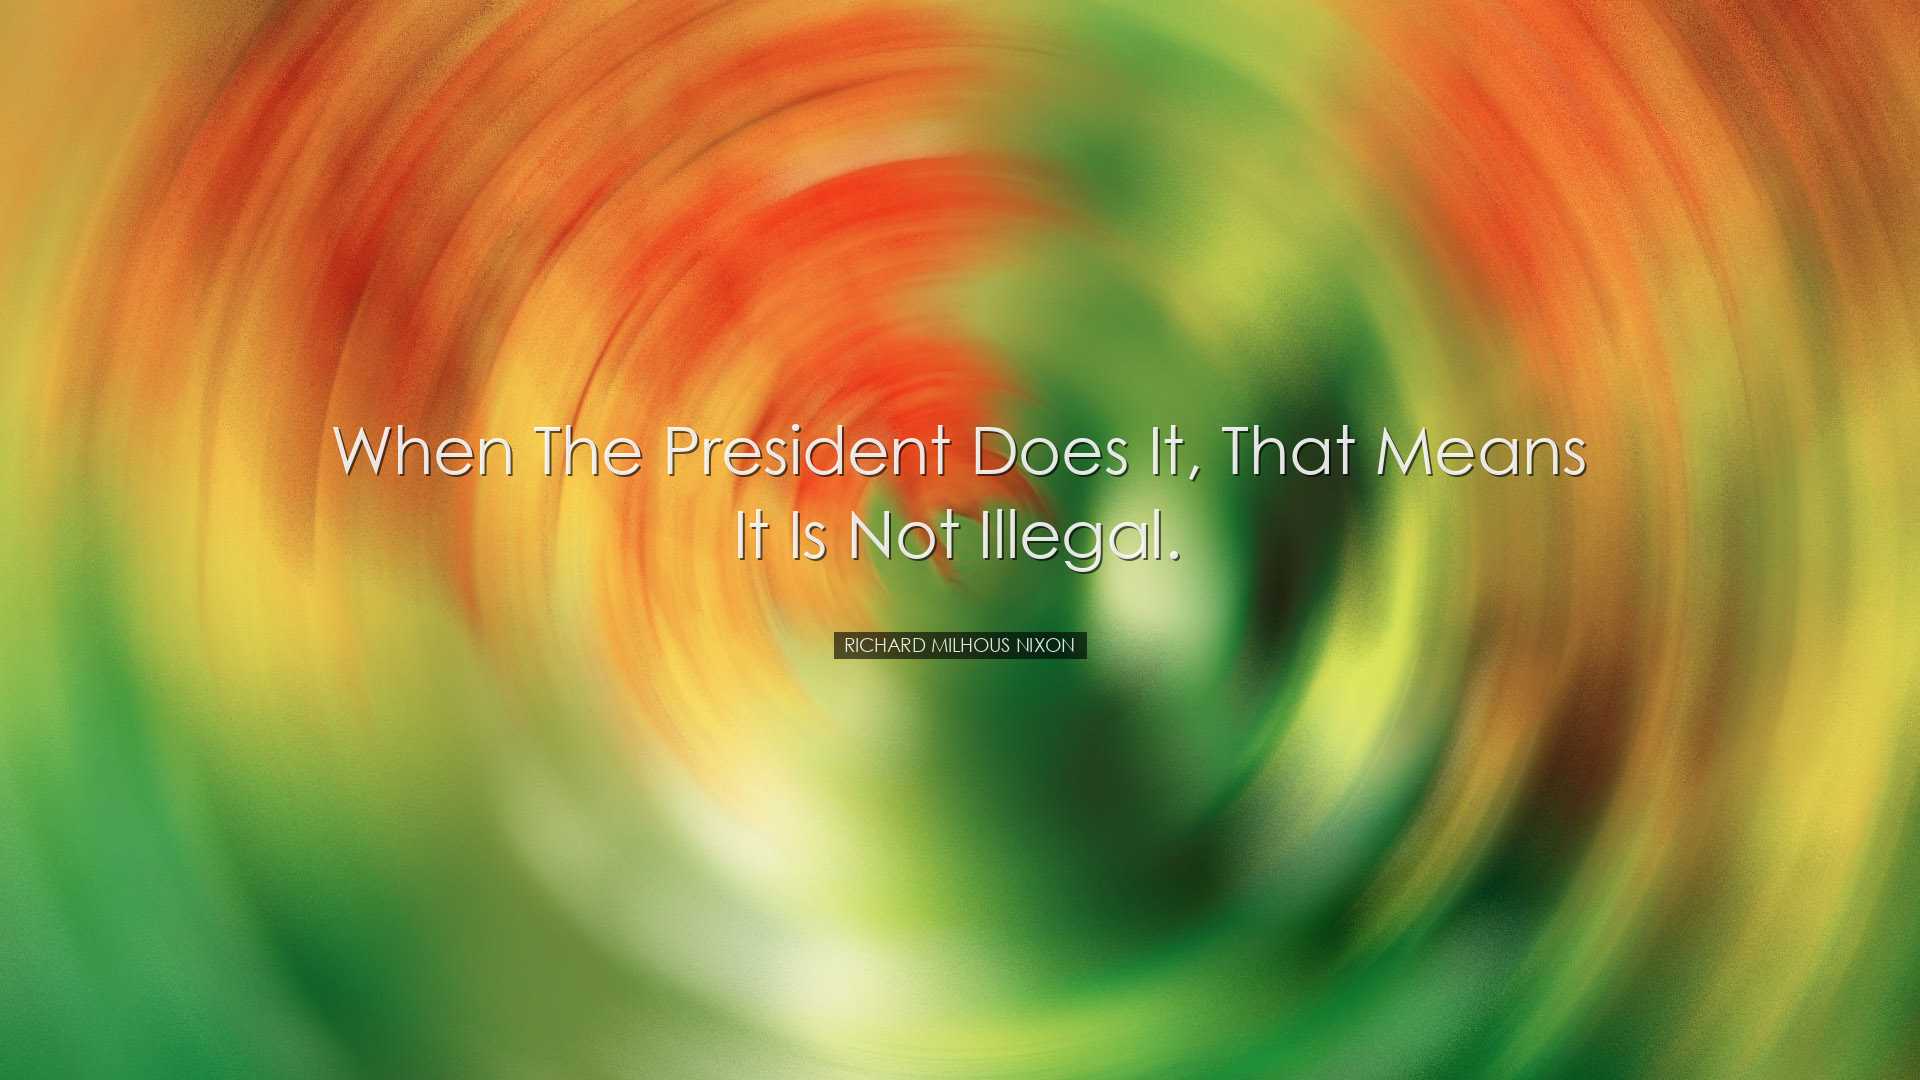 When the president does it, that means it is not illegal. - Richar